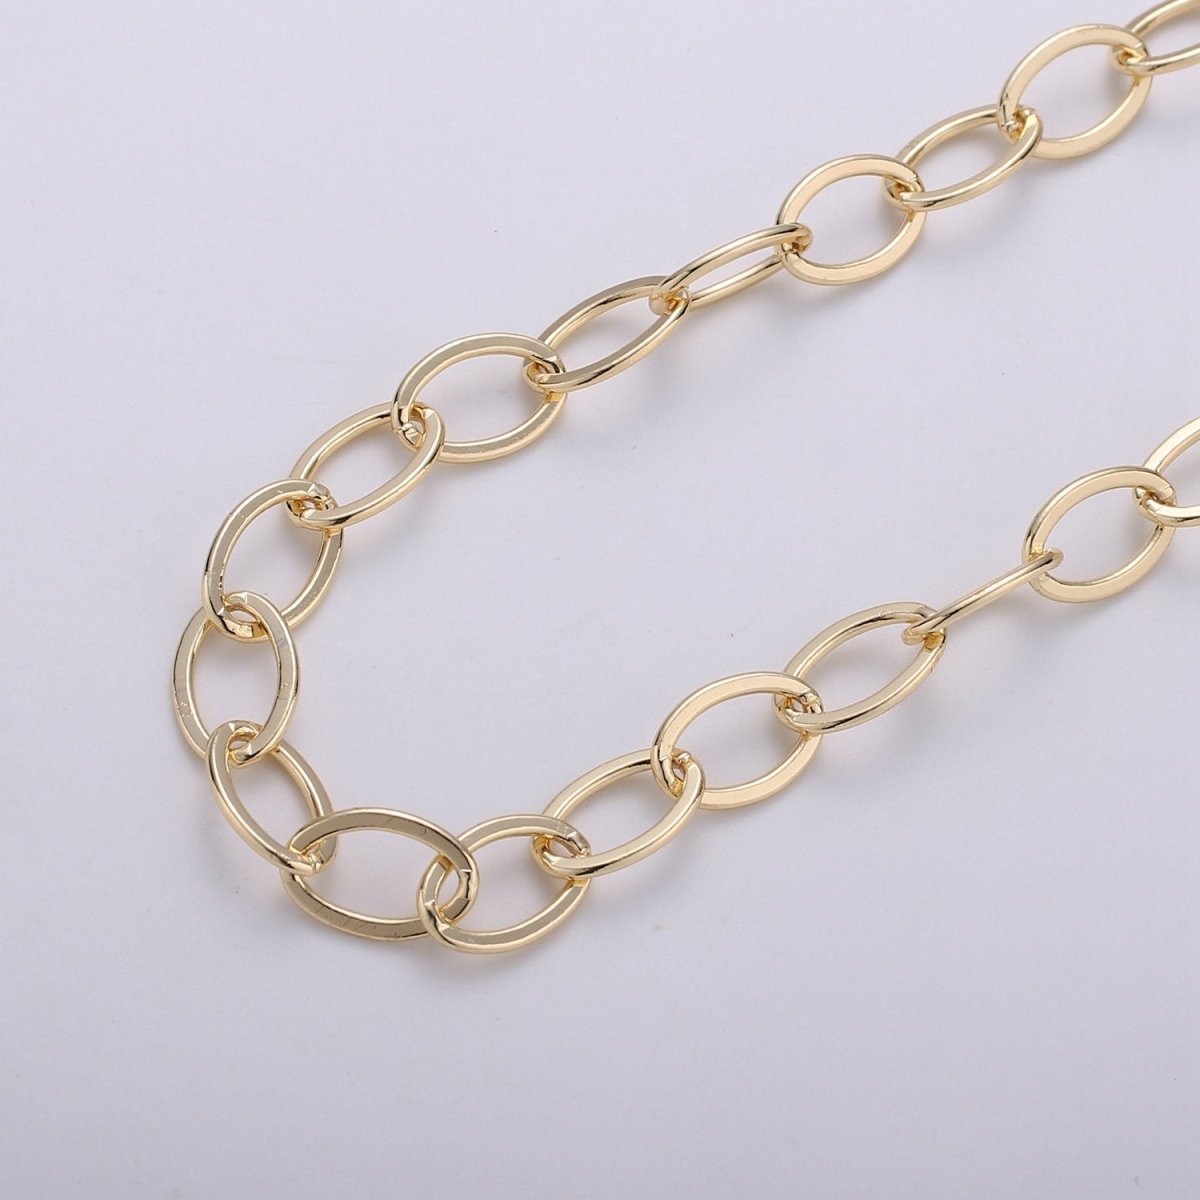 24K Gold Filled Rolo Unfinished Chain, 8X12mm Width, Thin Flat Minimalist Rolo For Jewelry Making, For Necklace, Bracelet, Anklet Supply Component | ROLL-259 Clearance Pricing - DLUXCA